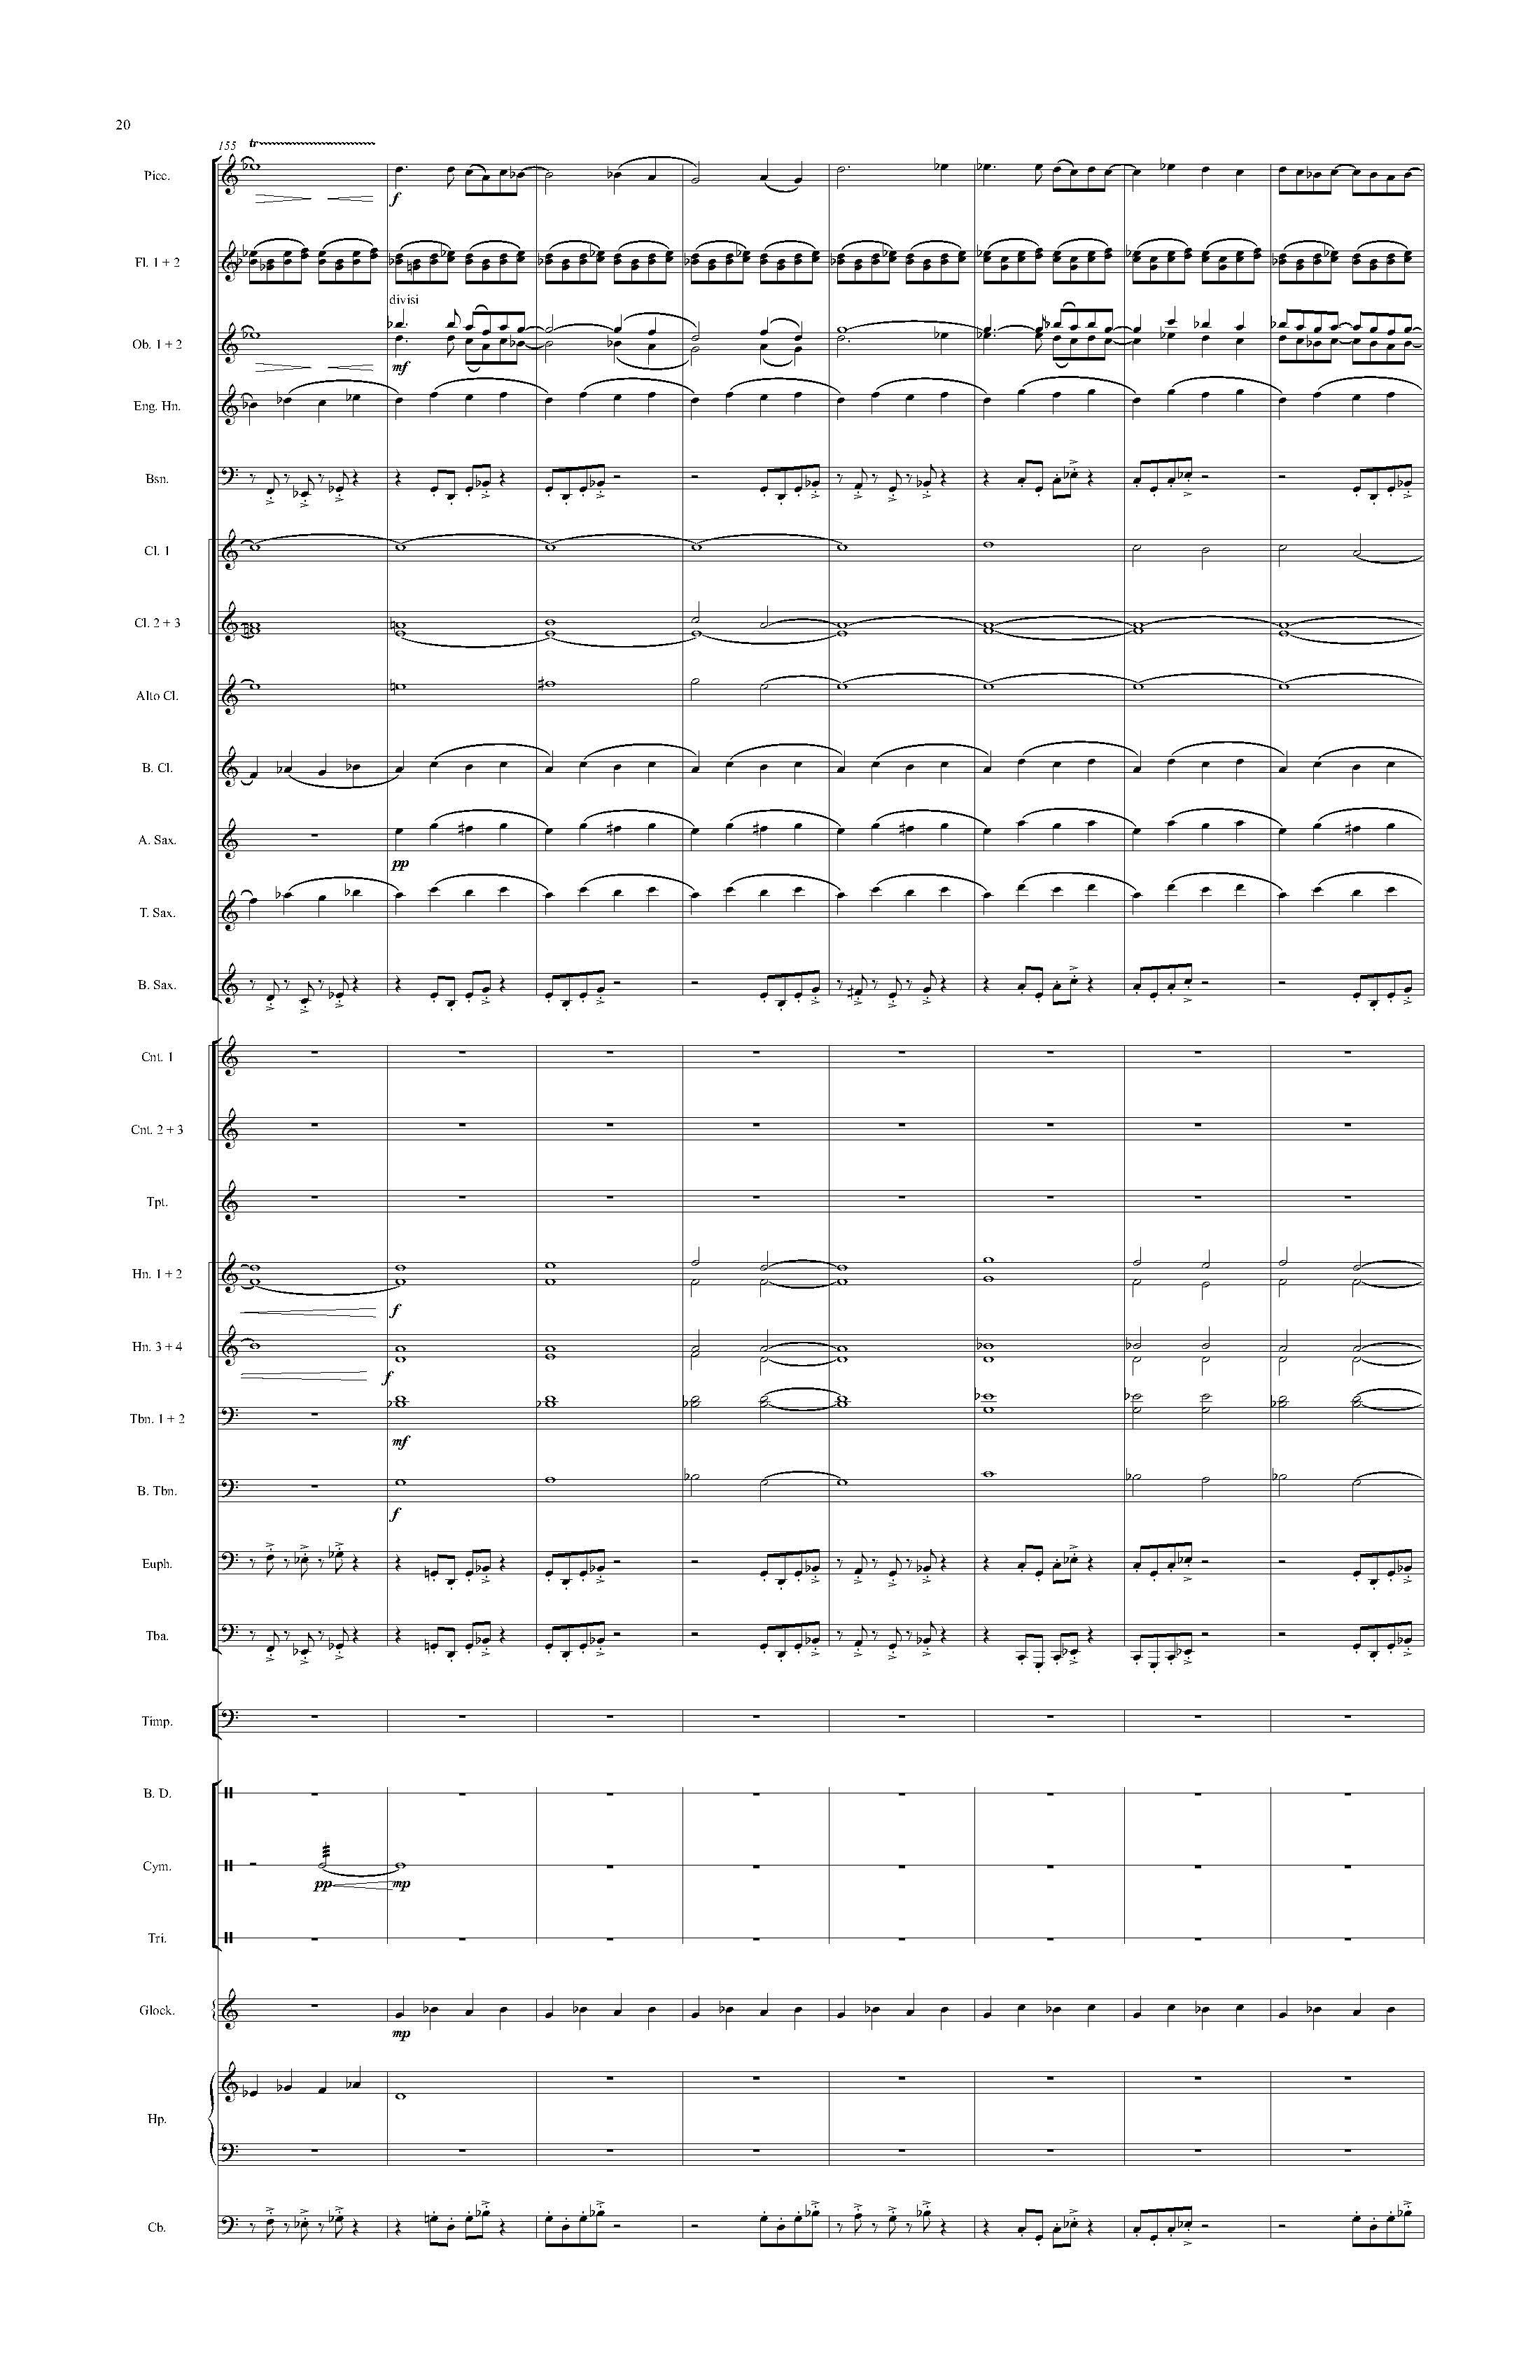 Psyche - Complete Score_Page_26.jpg